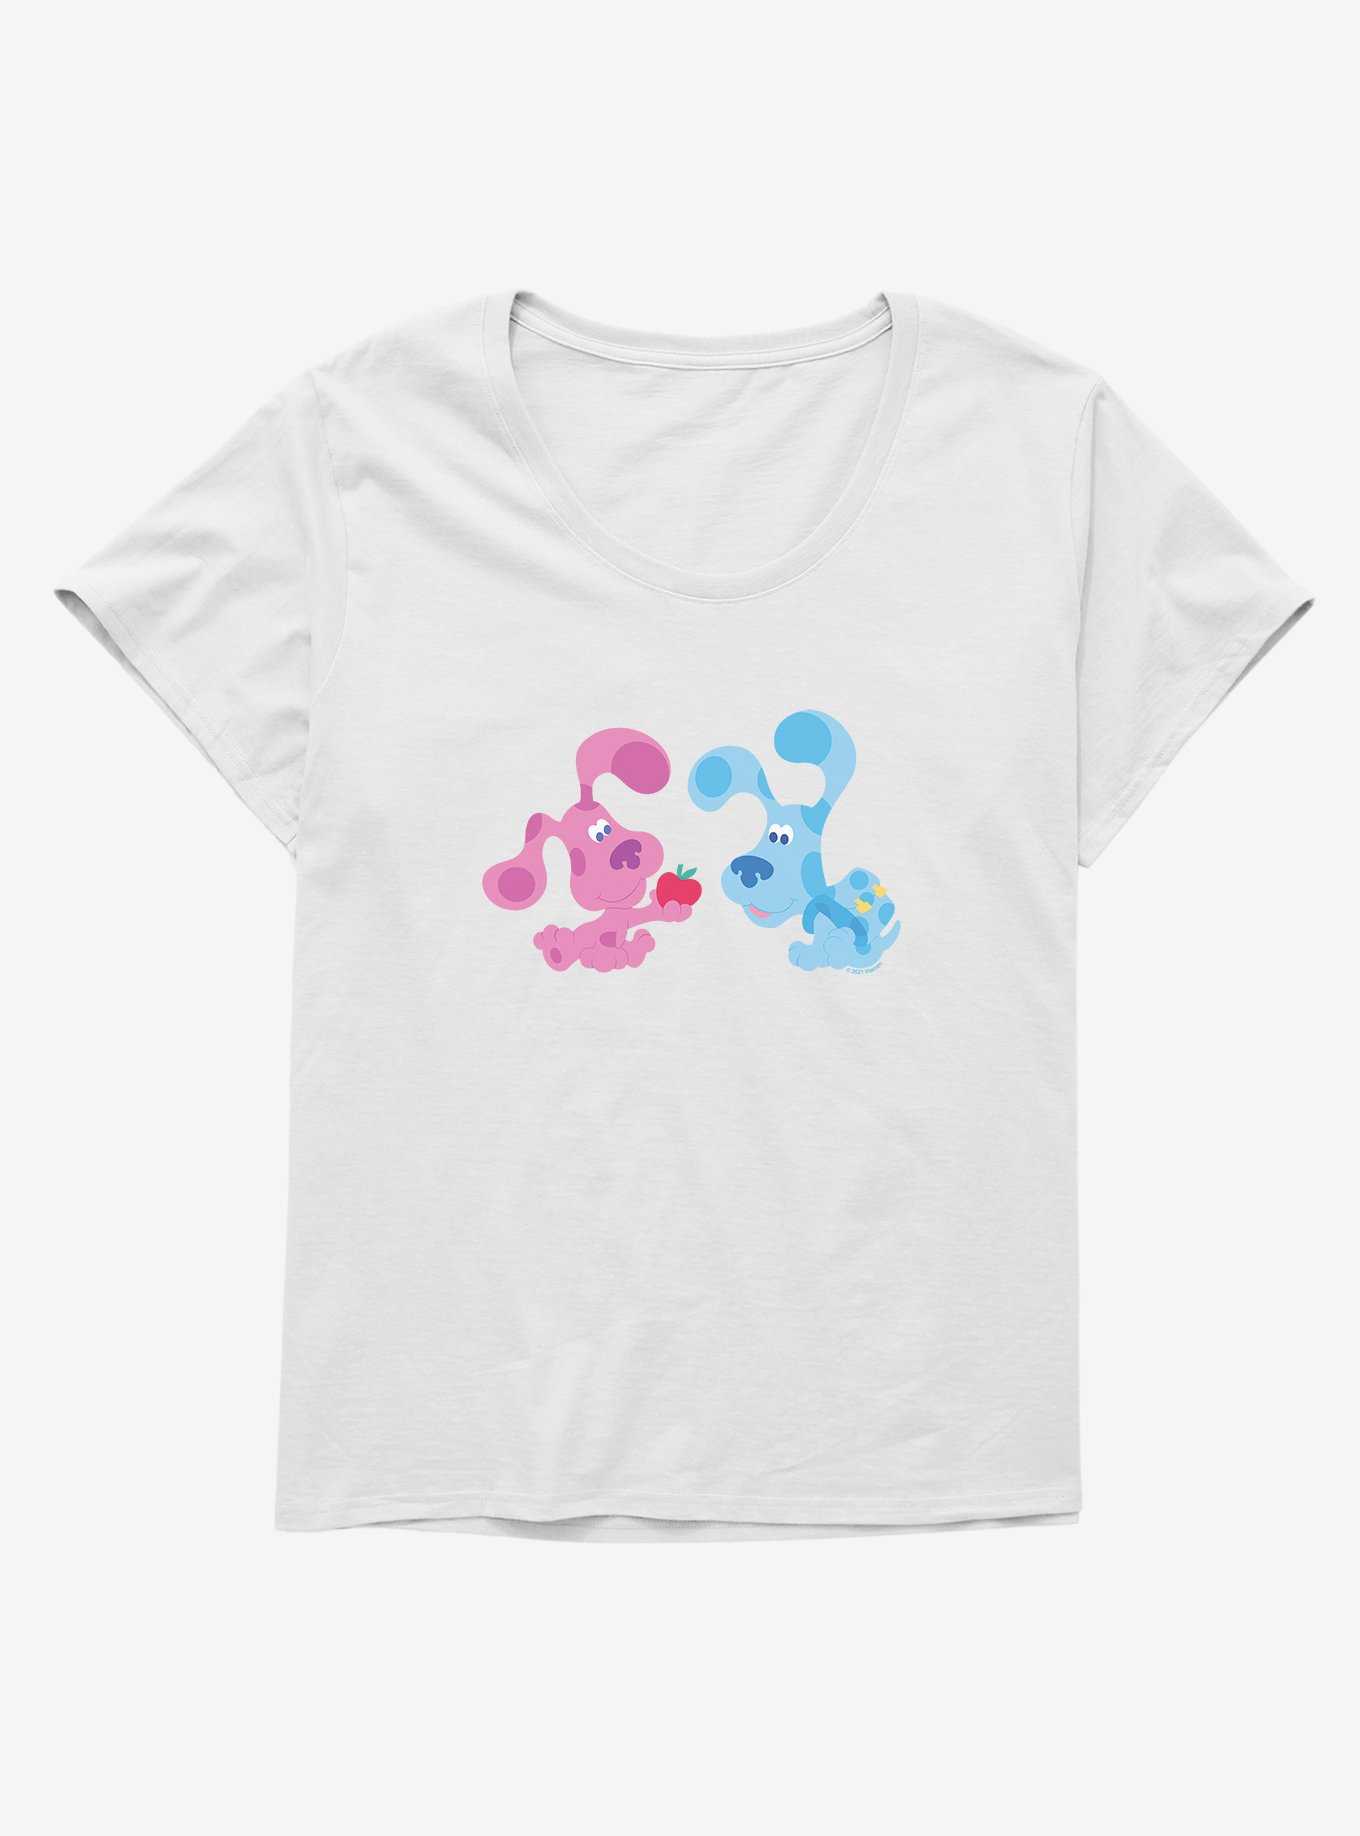 Blue's Clues Magenta And Blue Apple Girls T-Shirt Plus Size, , hi-res